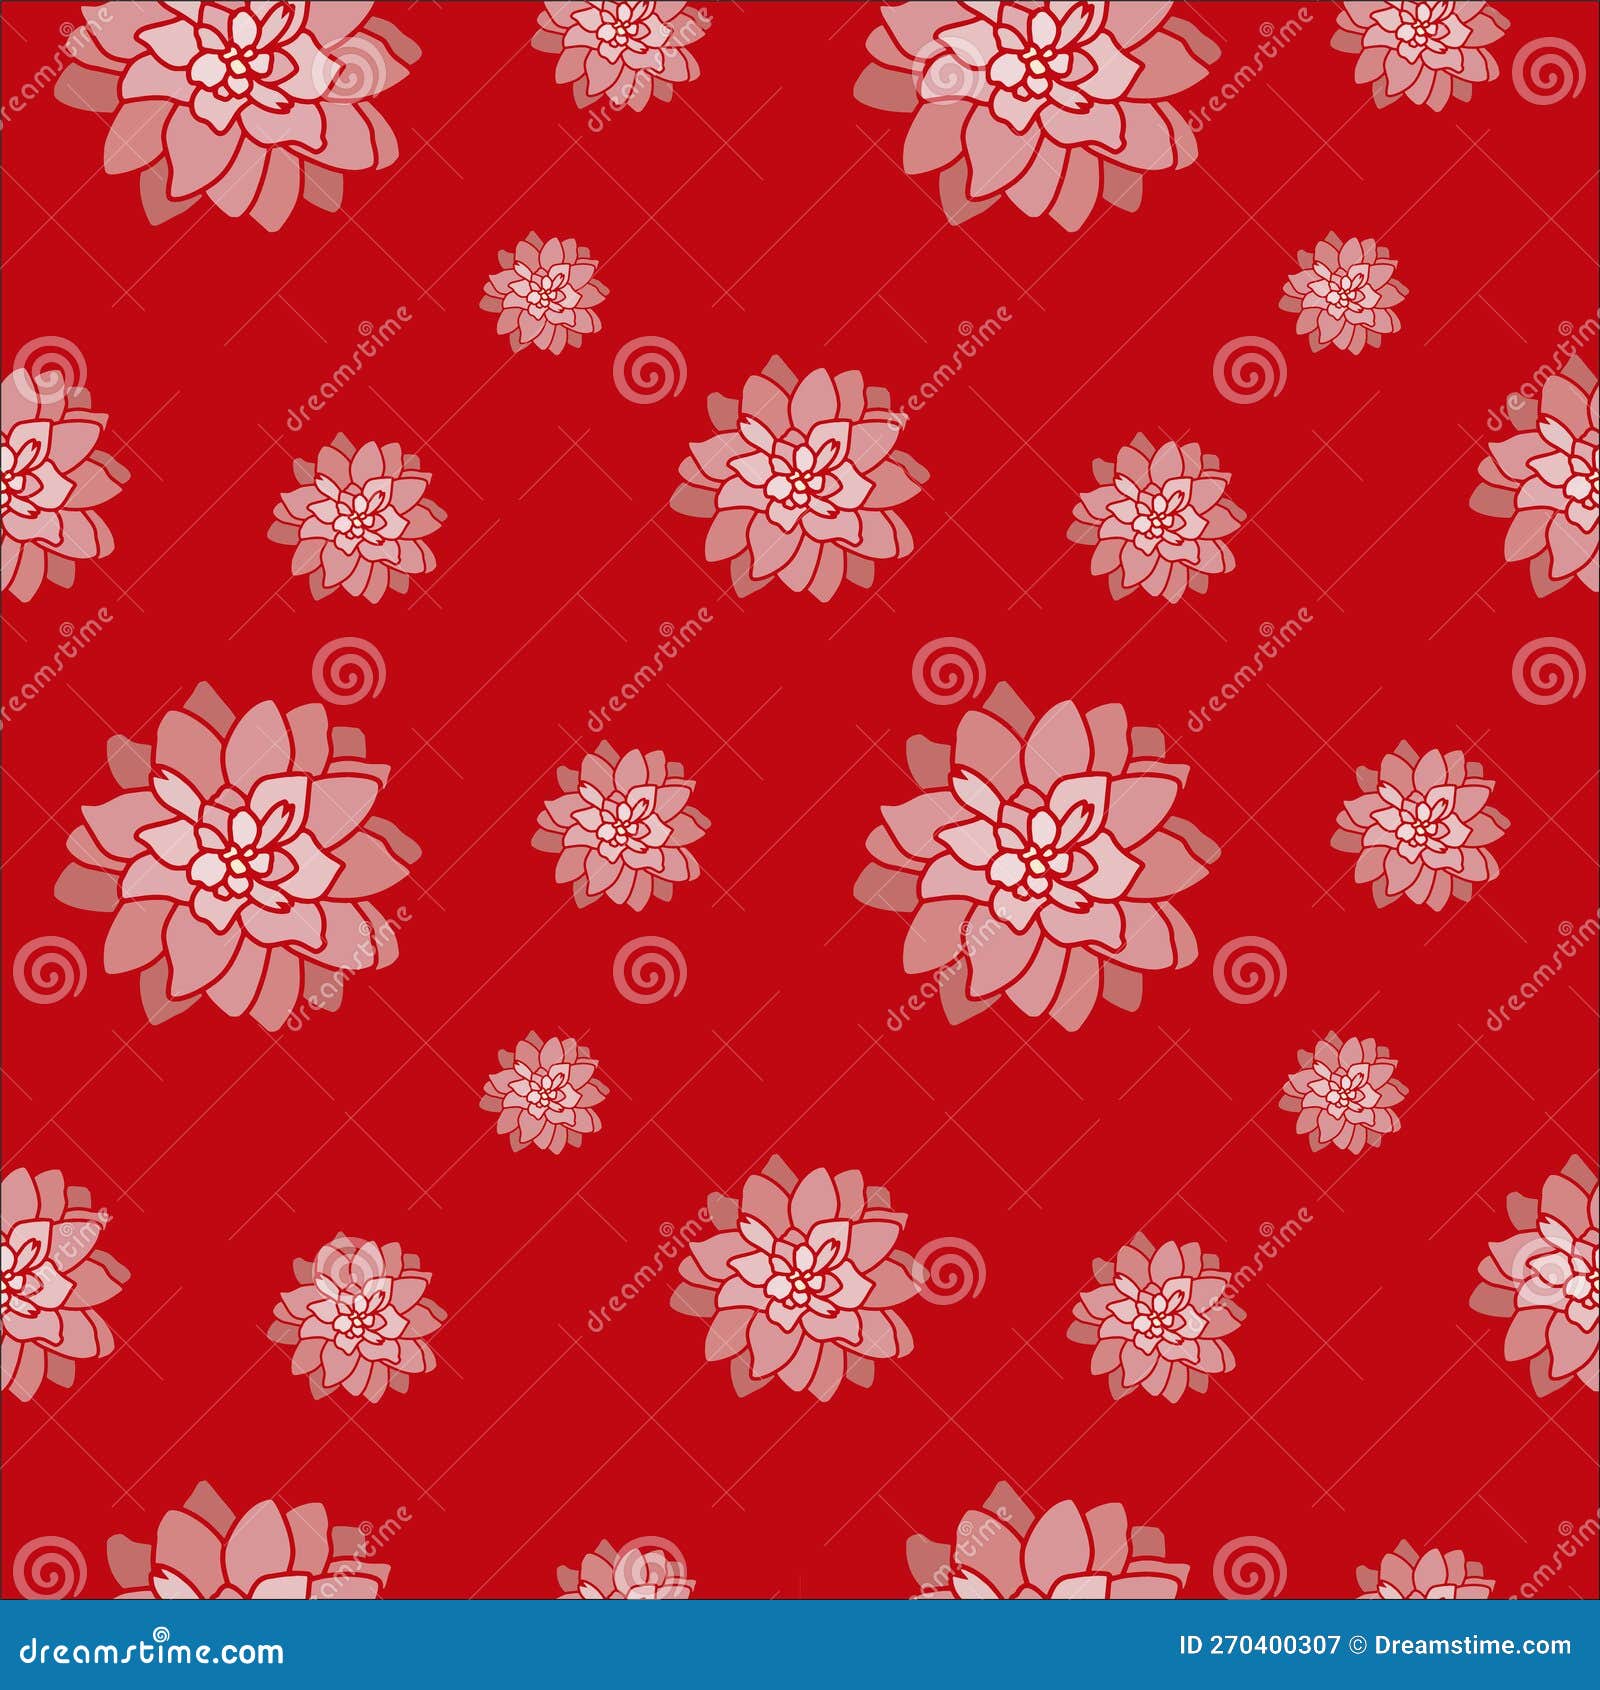 pink flowers with red background, pattern